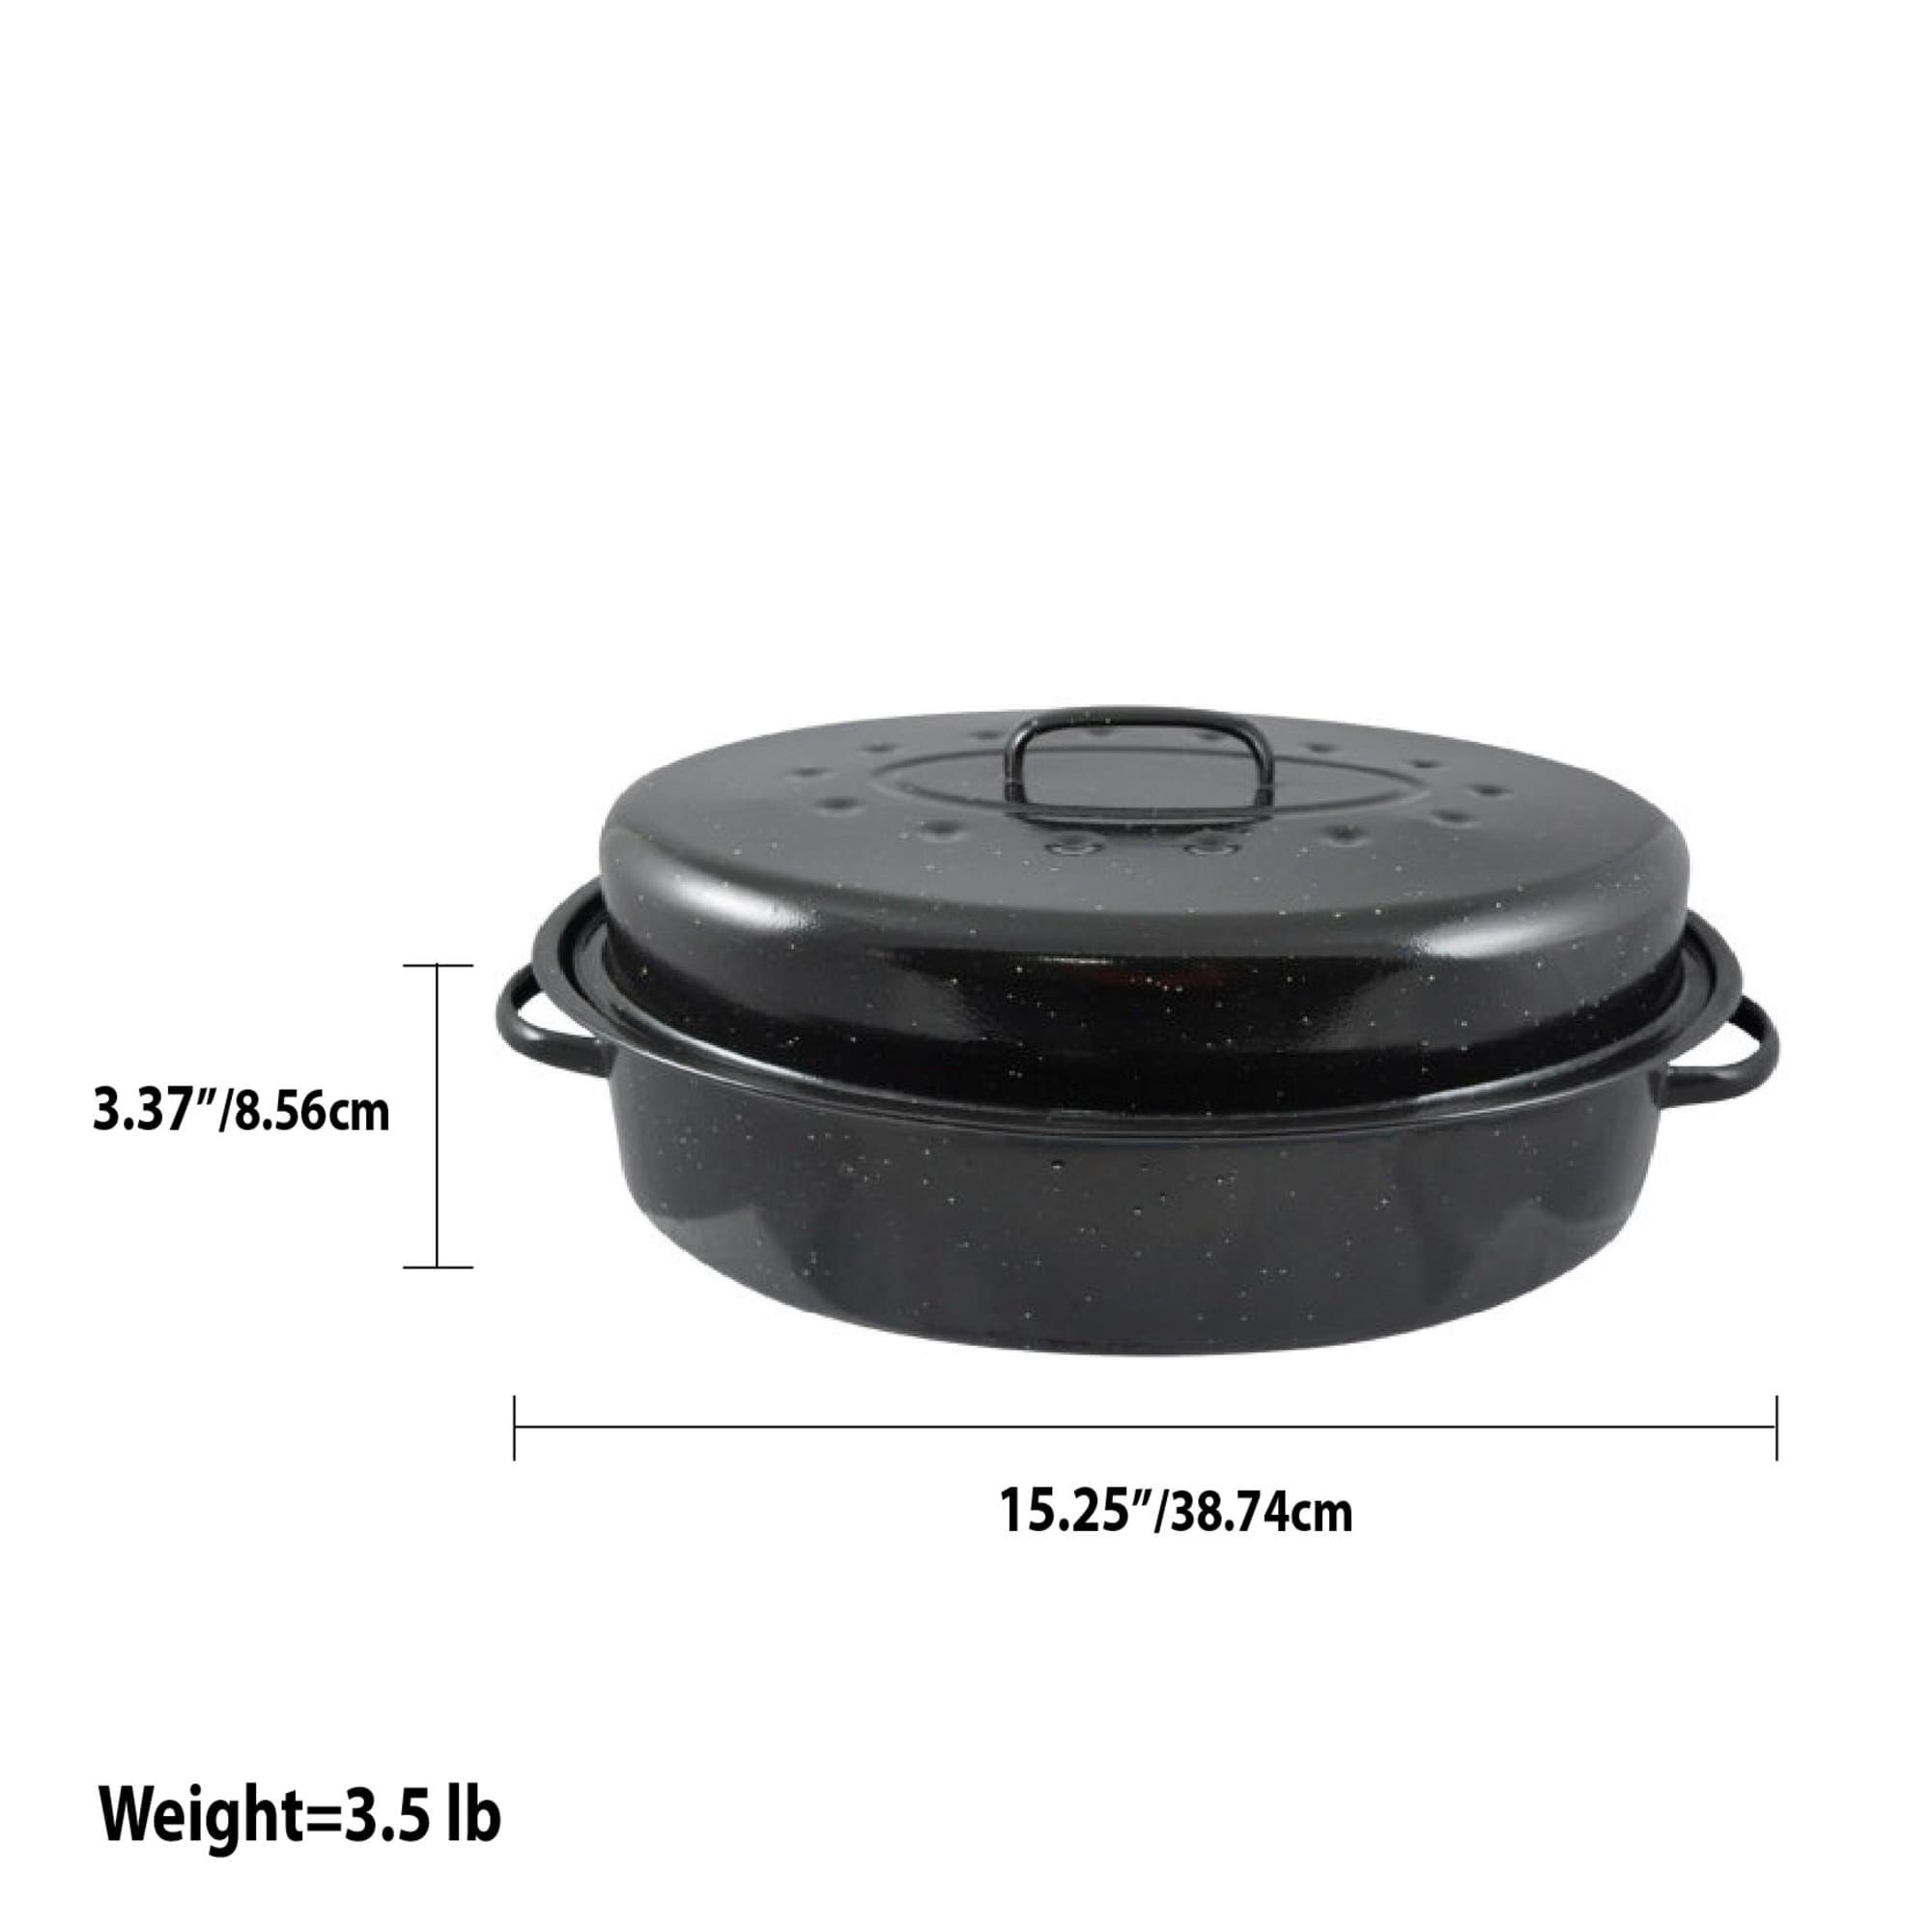 Home Basics Non-Stick Carbon Steel Roaster with Lid $10.00 EACH, CASE PACK OF 6